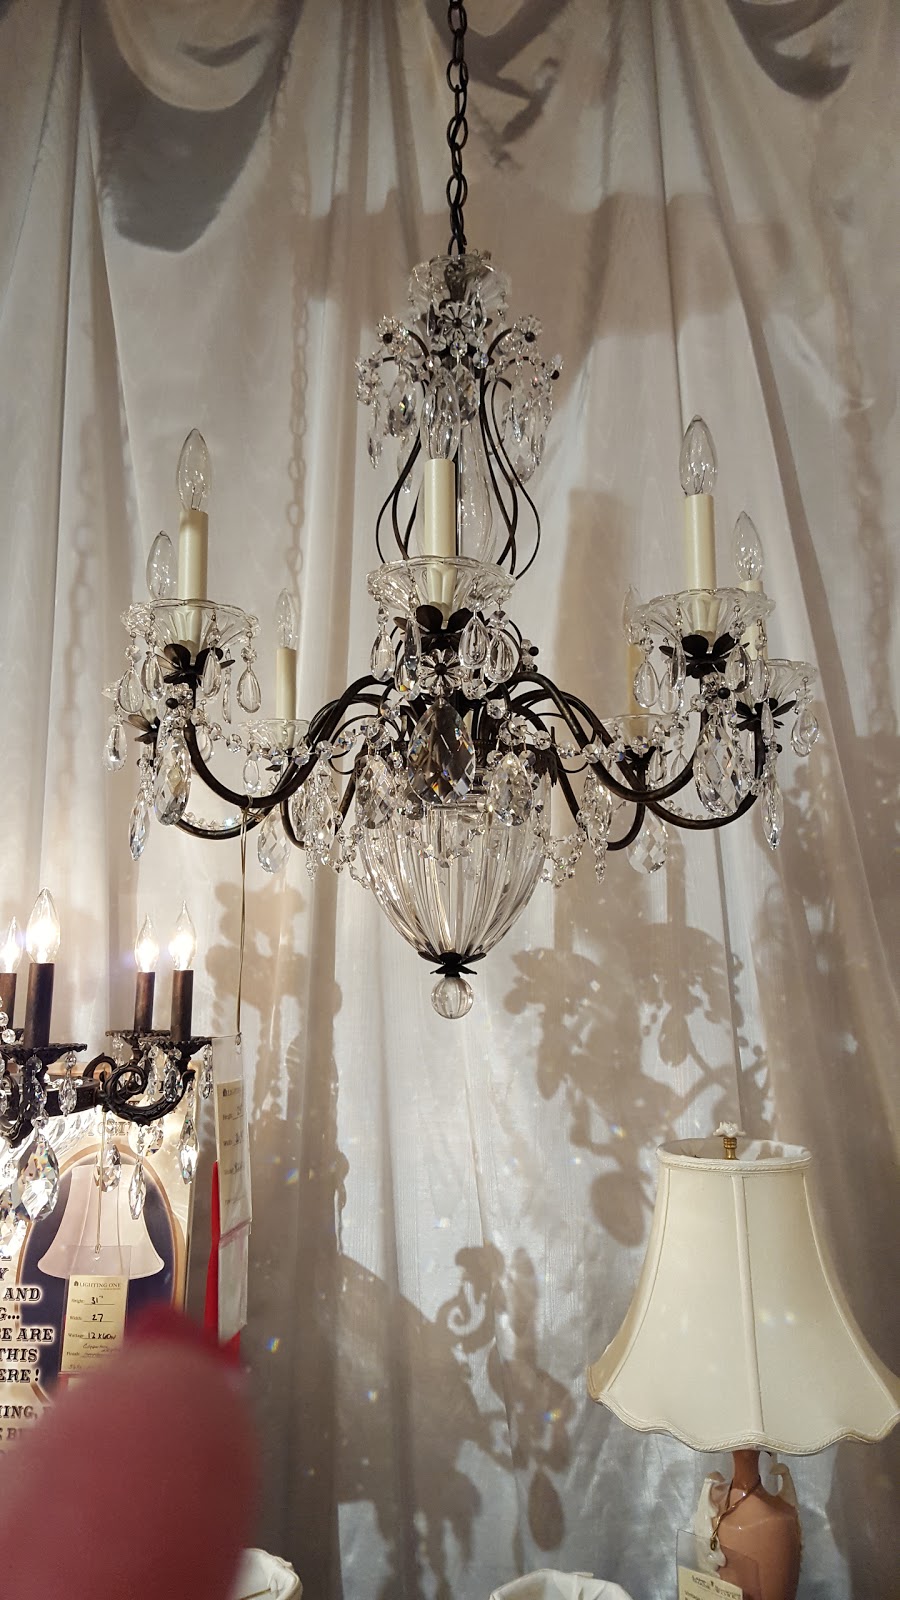 Lamp & Shade Works | 160 Delsea Dr, Sewell, NJ 08080 | Phone: (856) 401-1007